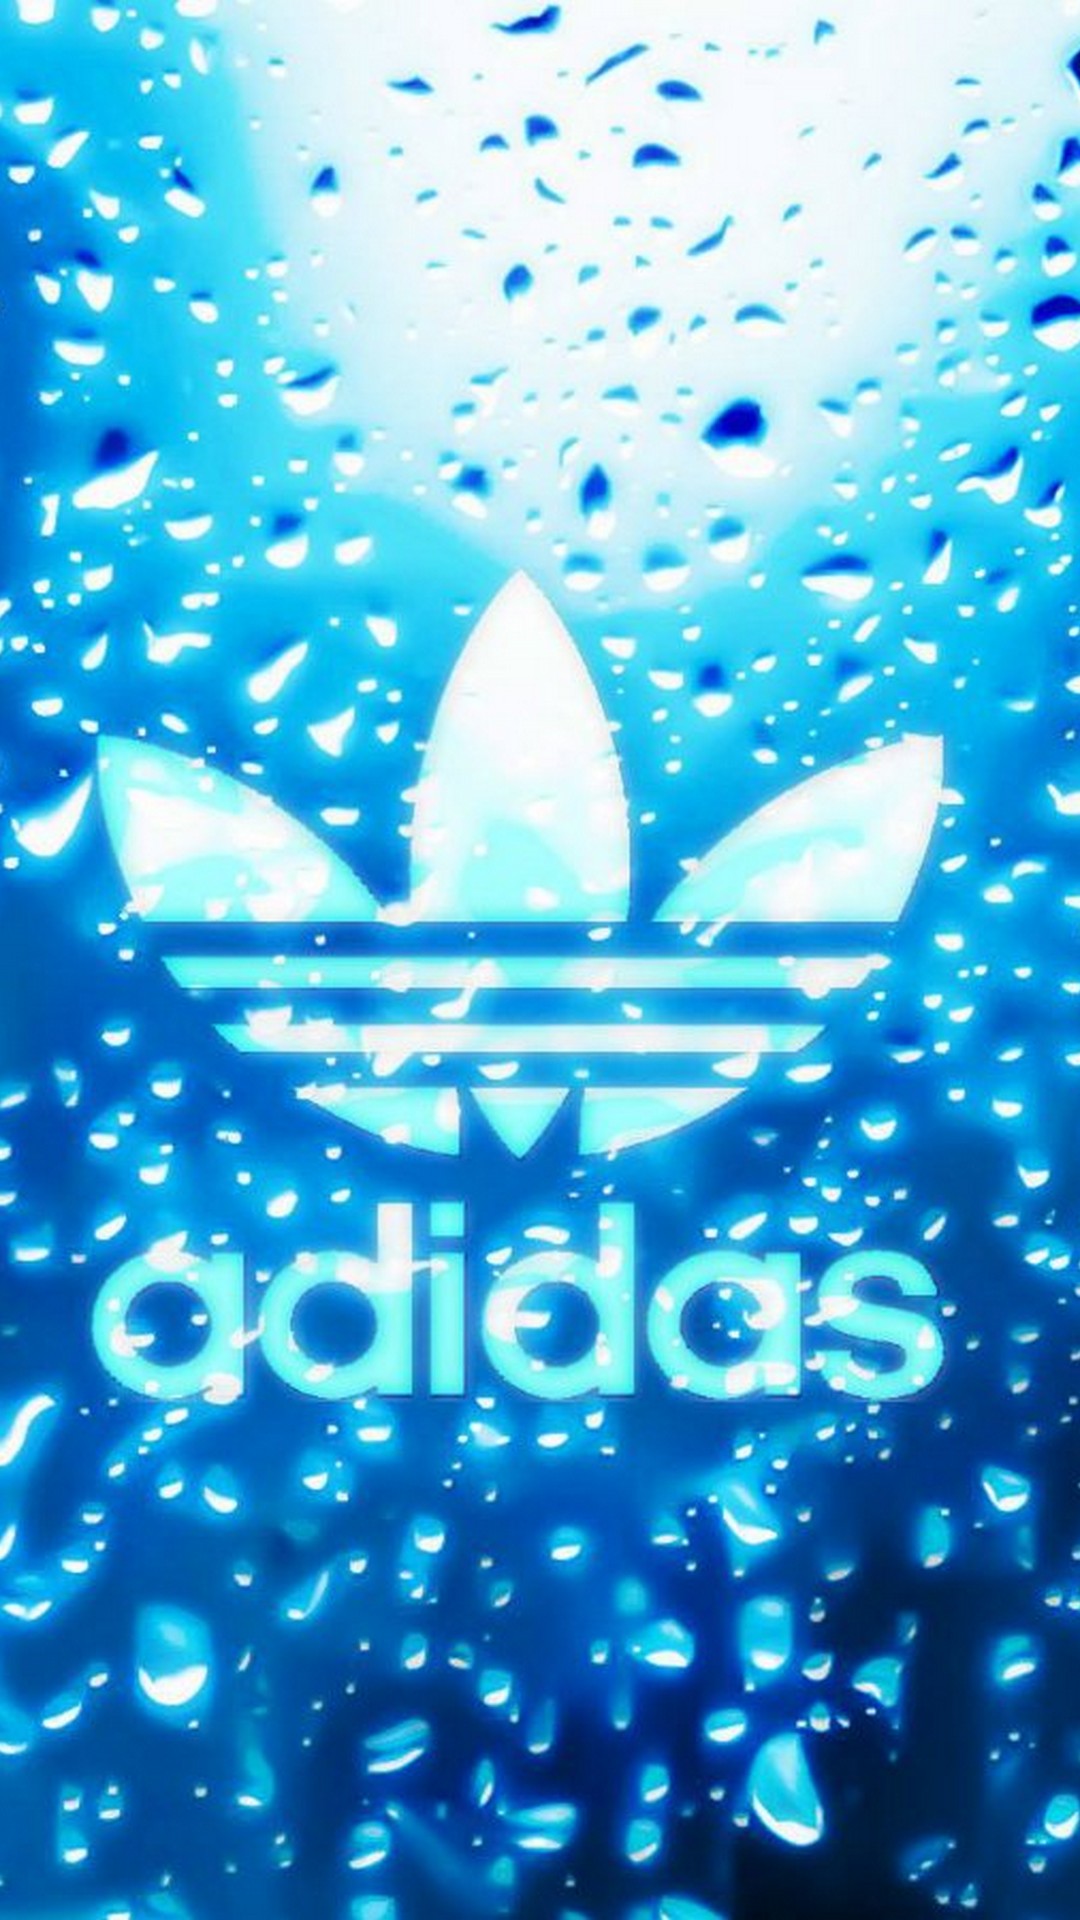 Wallpaper Adidas Logo Android With high-resolution 1080X1920 pixel. You can use this wallpaper for your Android backgrounds, Tablet, Samsung Screensavers, Mobile Phone Lock Screen and another Smartphones device